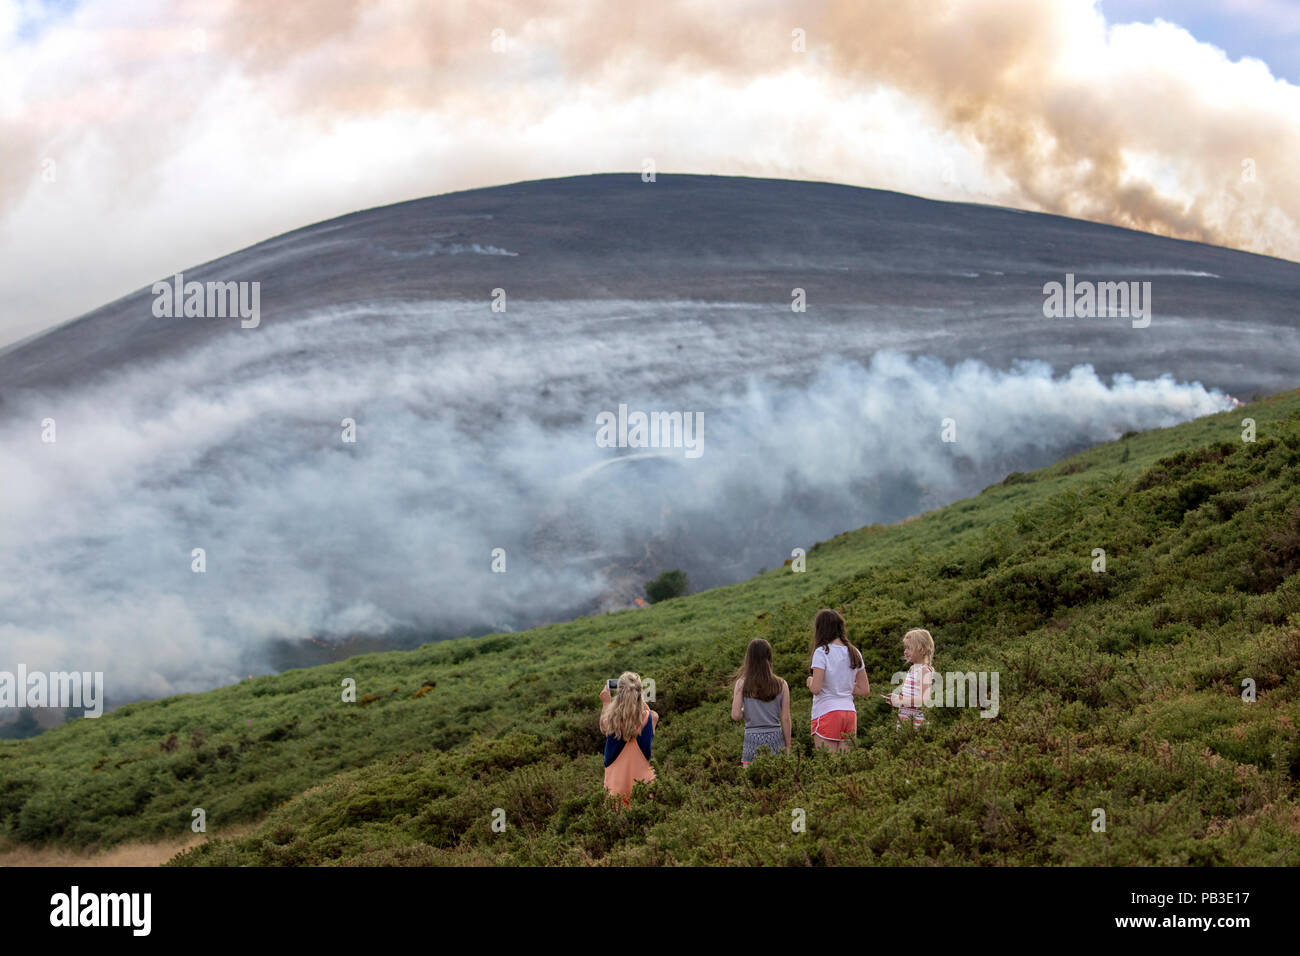 Public spectators watching the moorland fire at Llantysilio Mountain along the Horseshoe Pass, Llangollen as the fire burns over the mountain due to heatwave temperatures in the UK Stock Photo